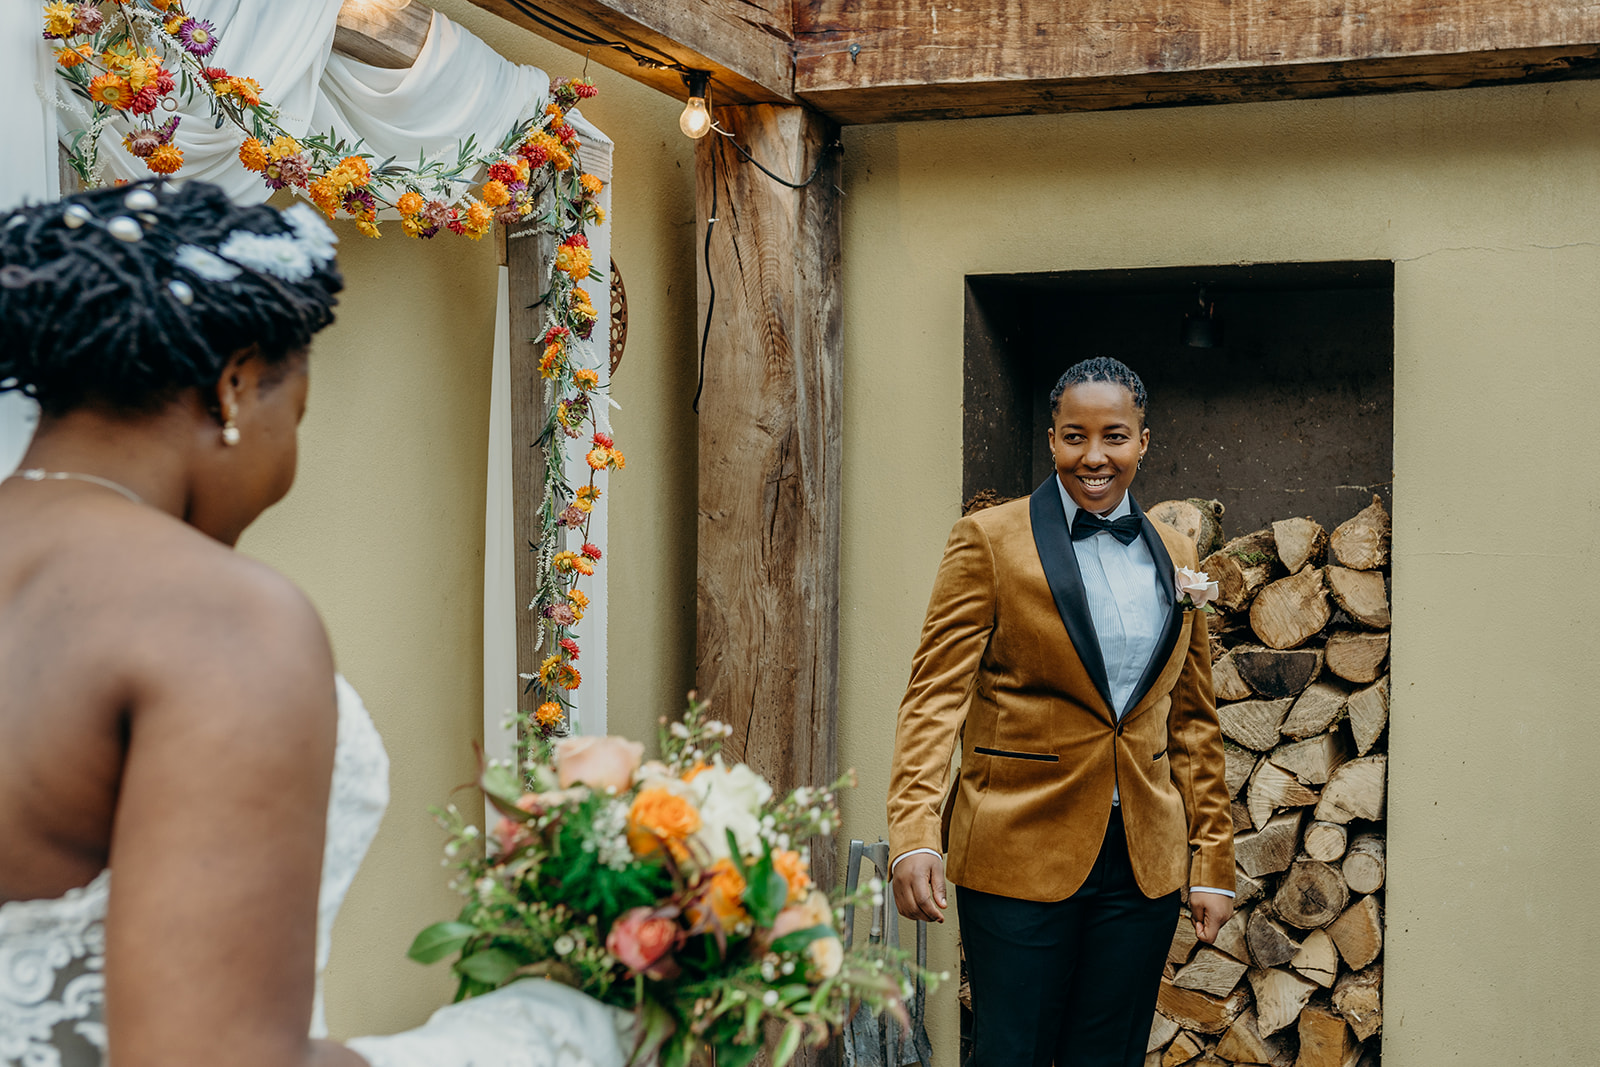 black same sex couple bride in a long white wedding gown walking into ceremony carrying orange and white bouquet other person dressed in gold velvet jacket and black bow tie